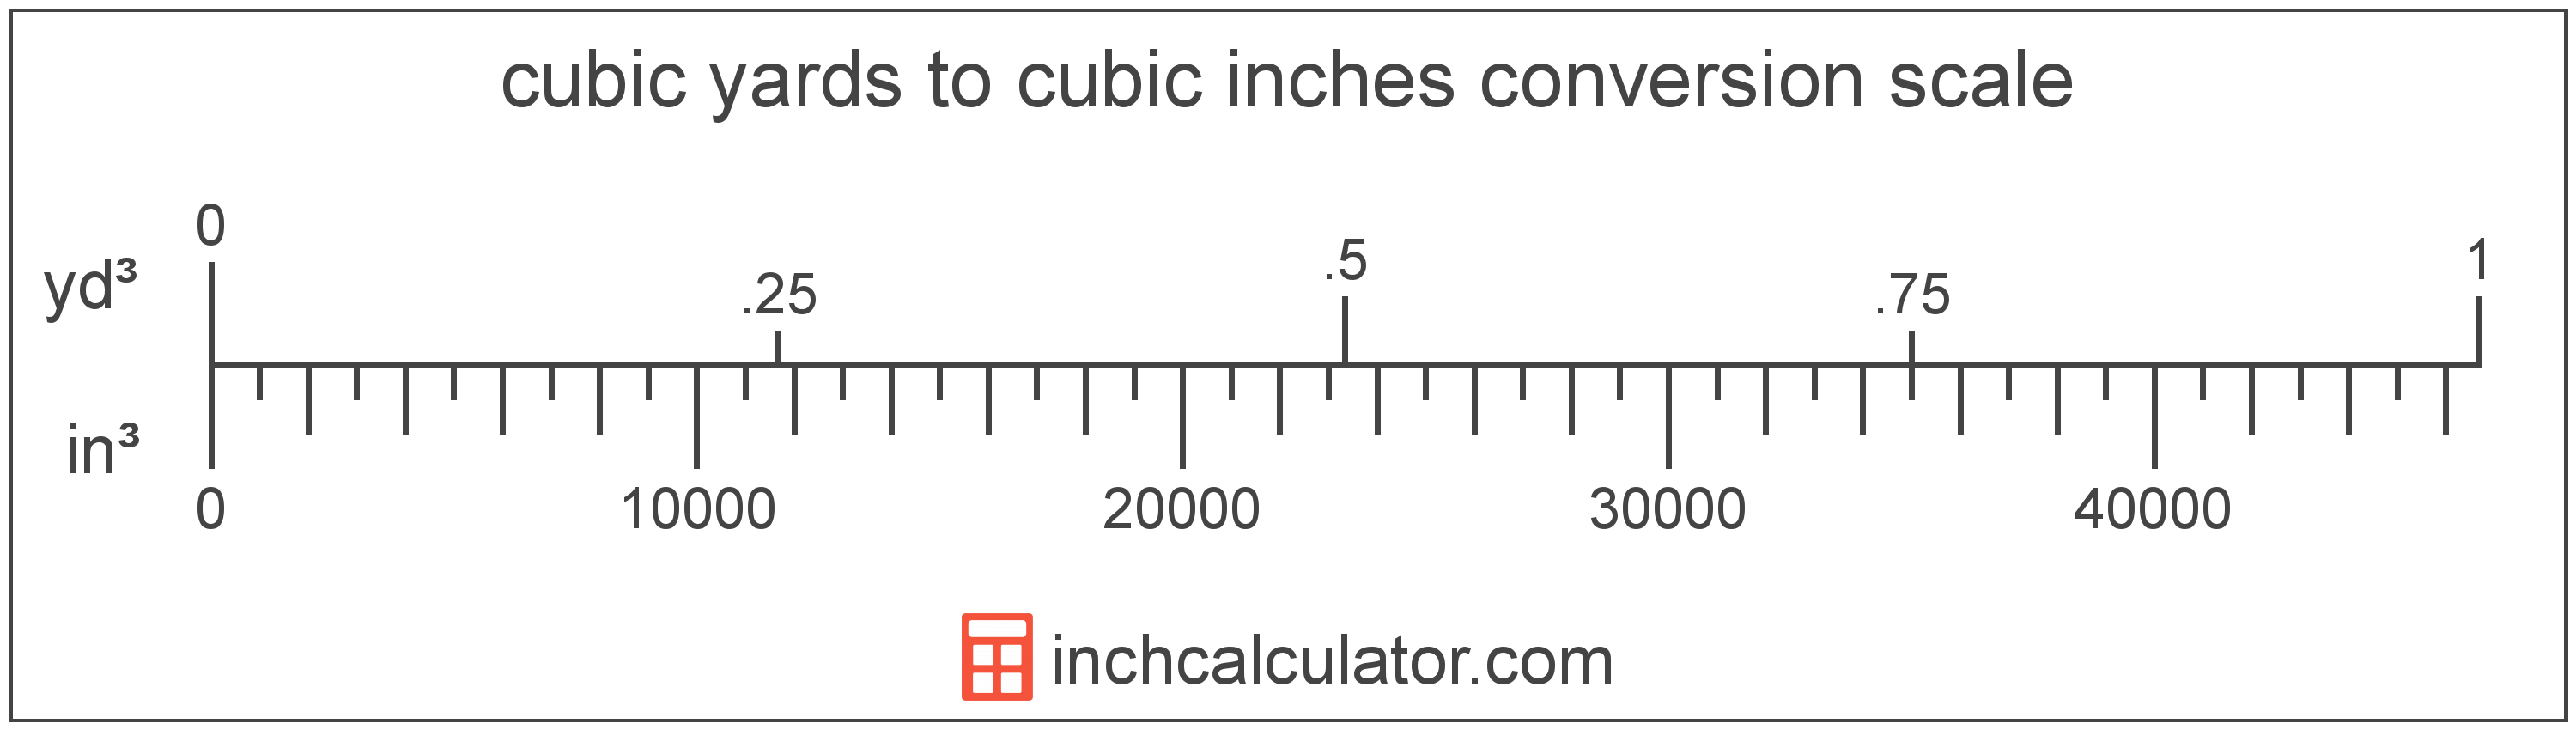 conversion scale showing cubic inches and equivalent cubic yards volume values